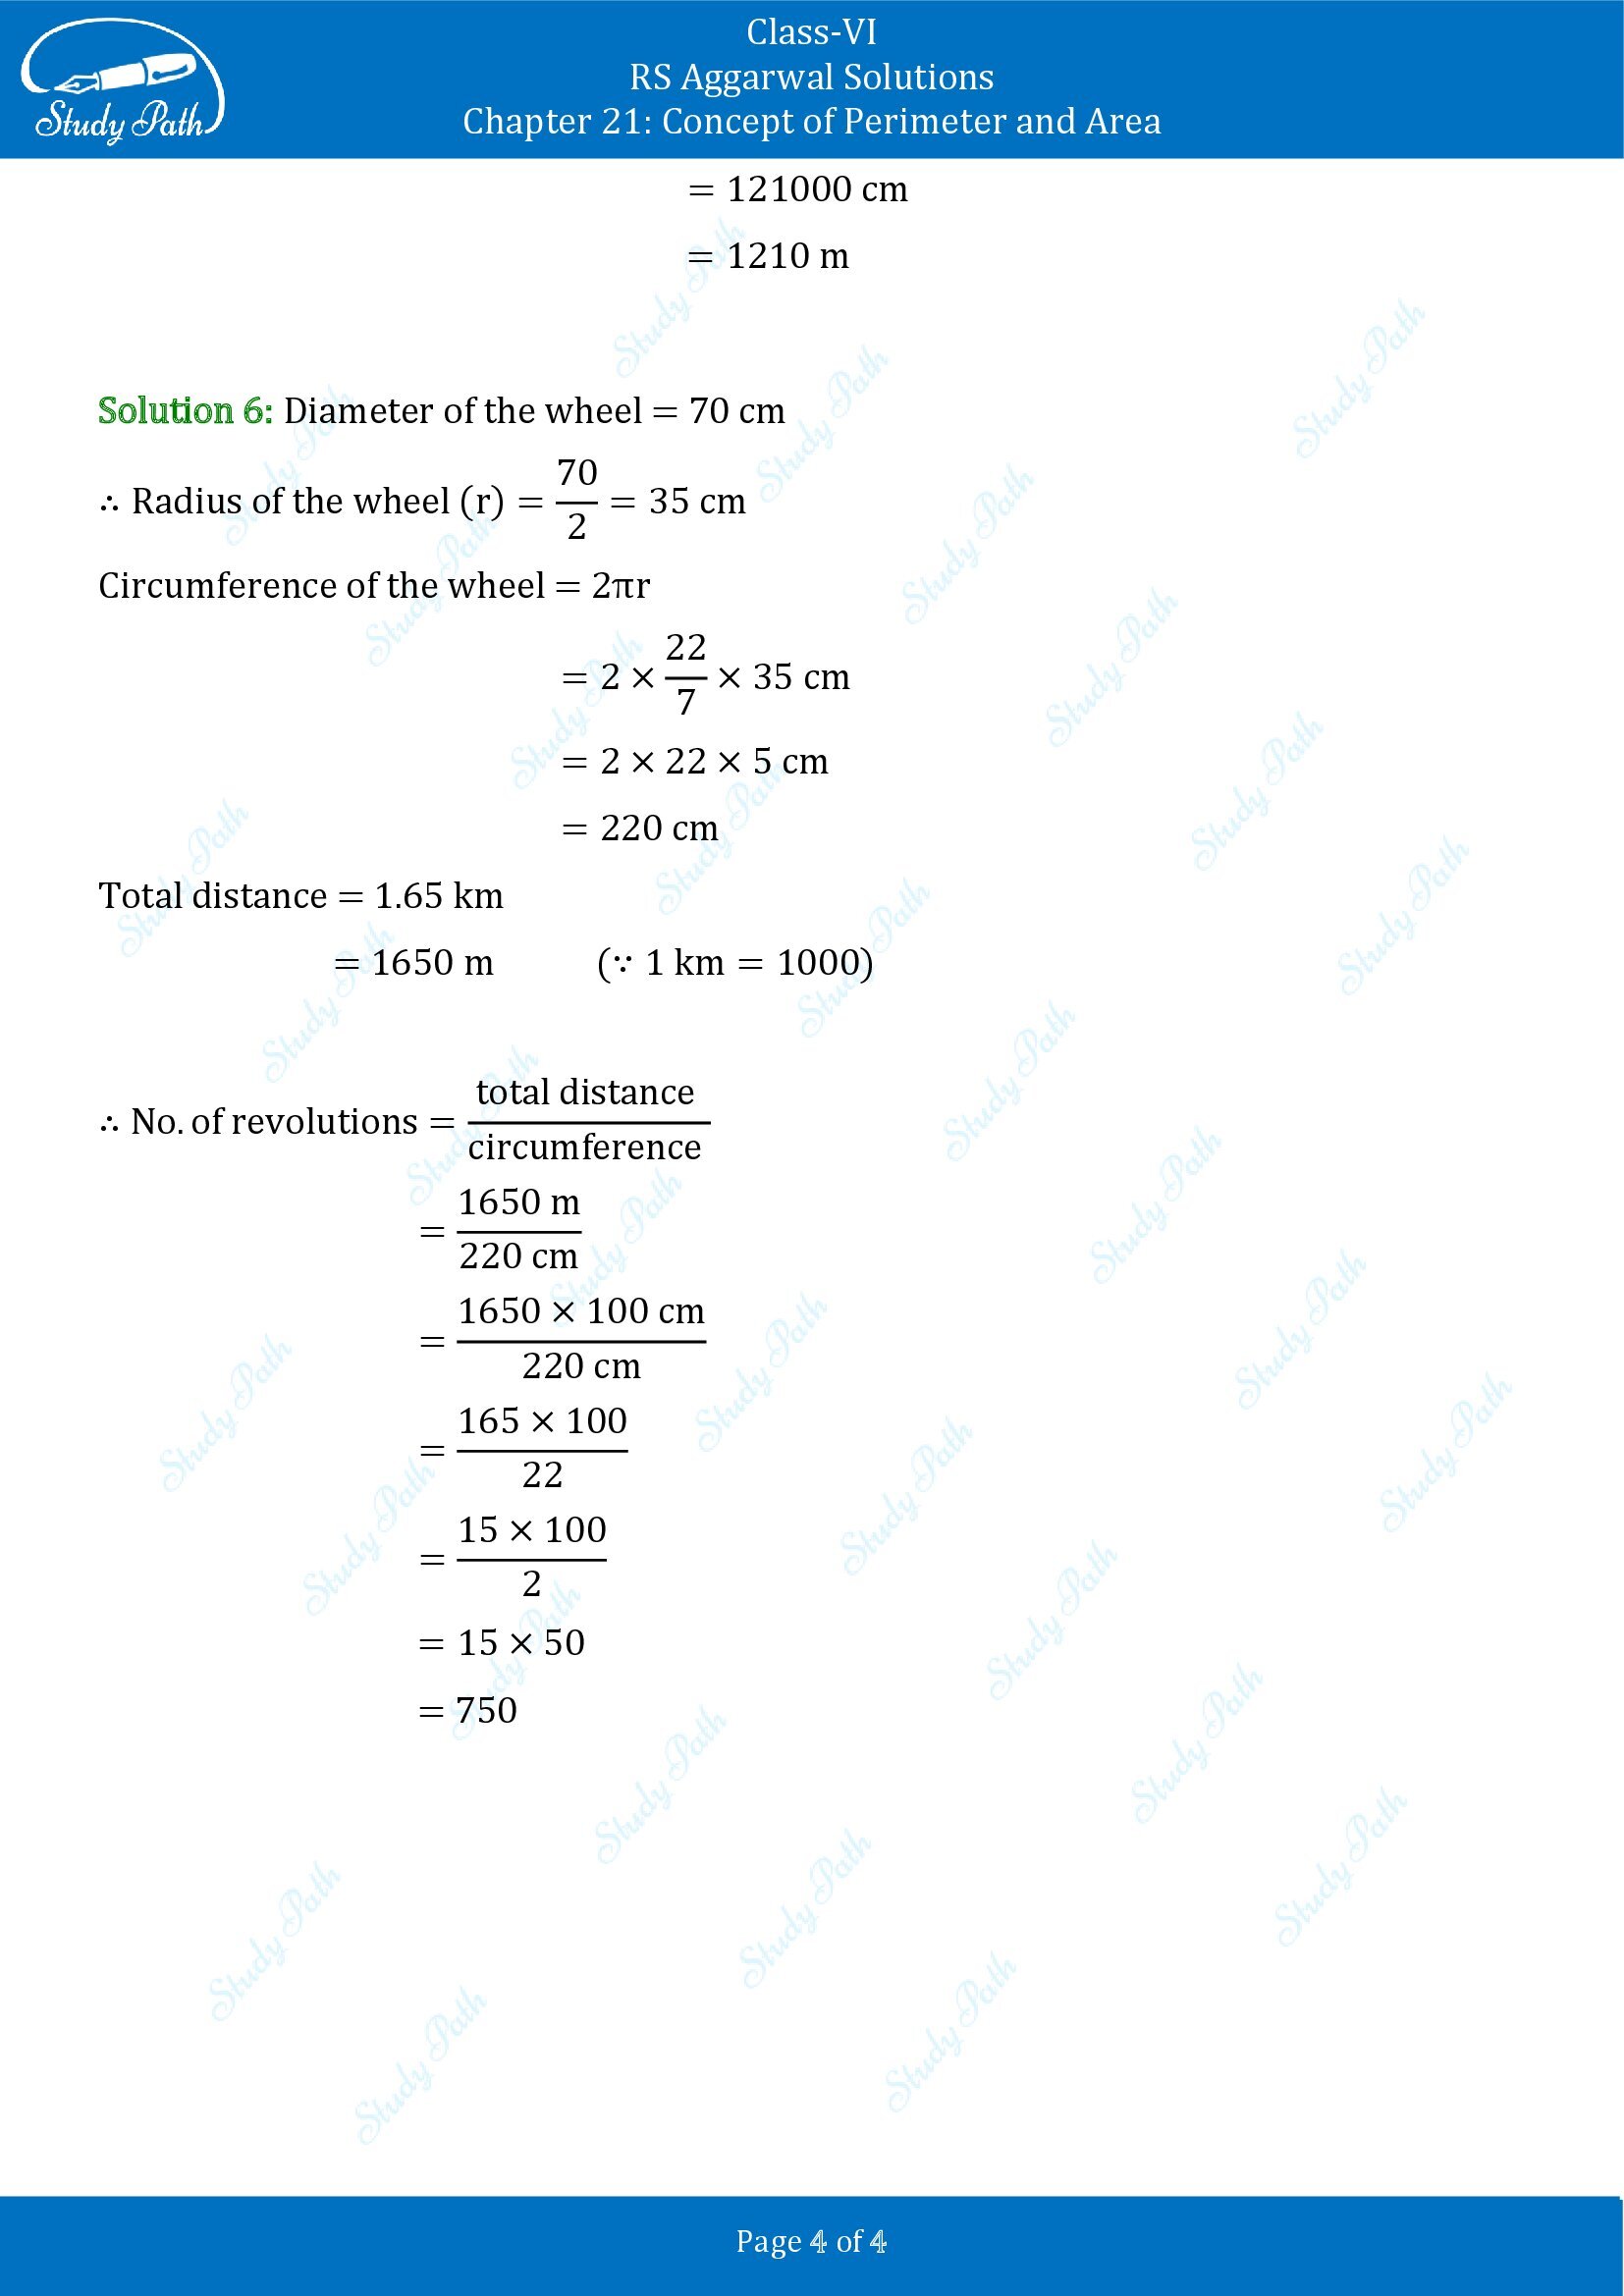 RS Aggarwal Solutions Class 6 Chapter 21 Concept of Perimeter and Area Exercise 21B 00004